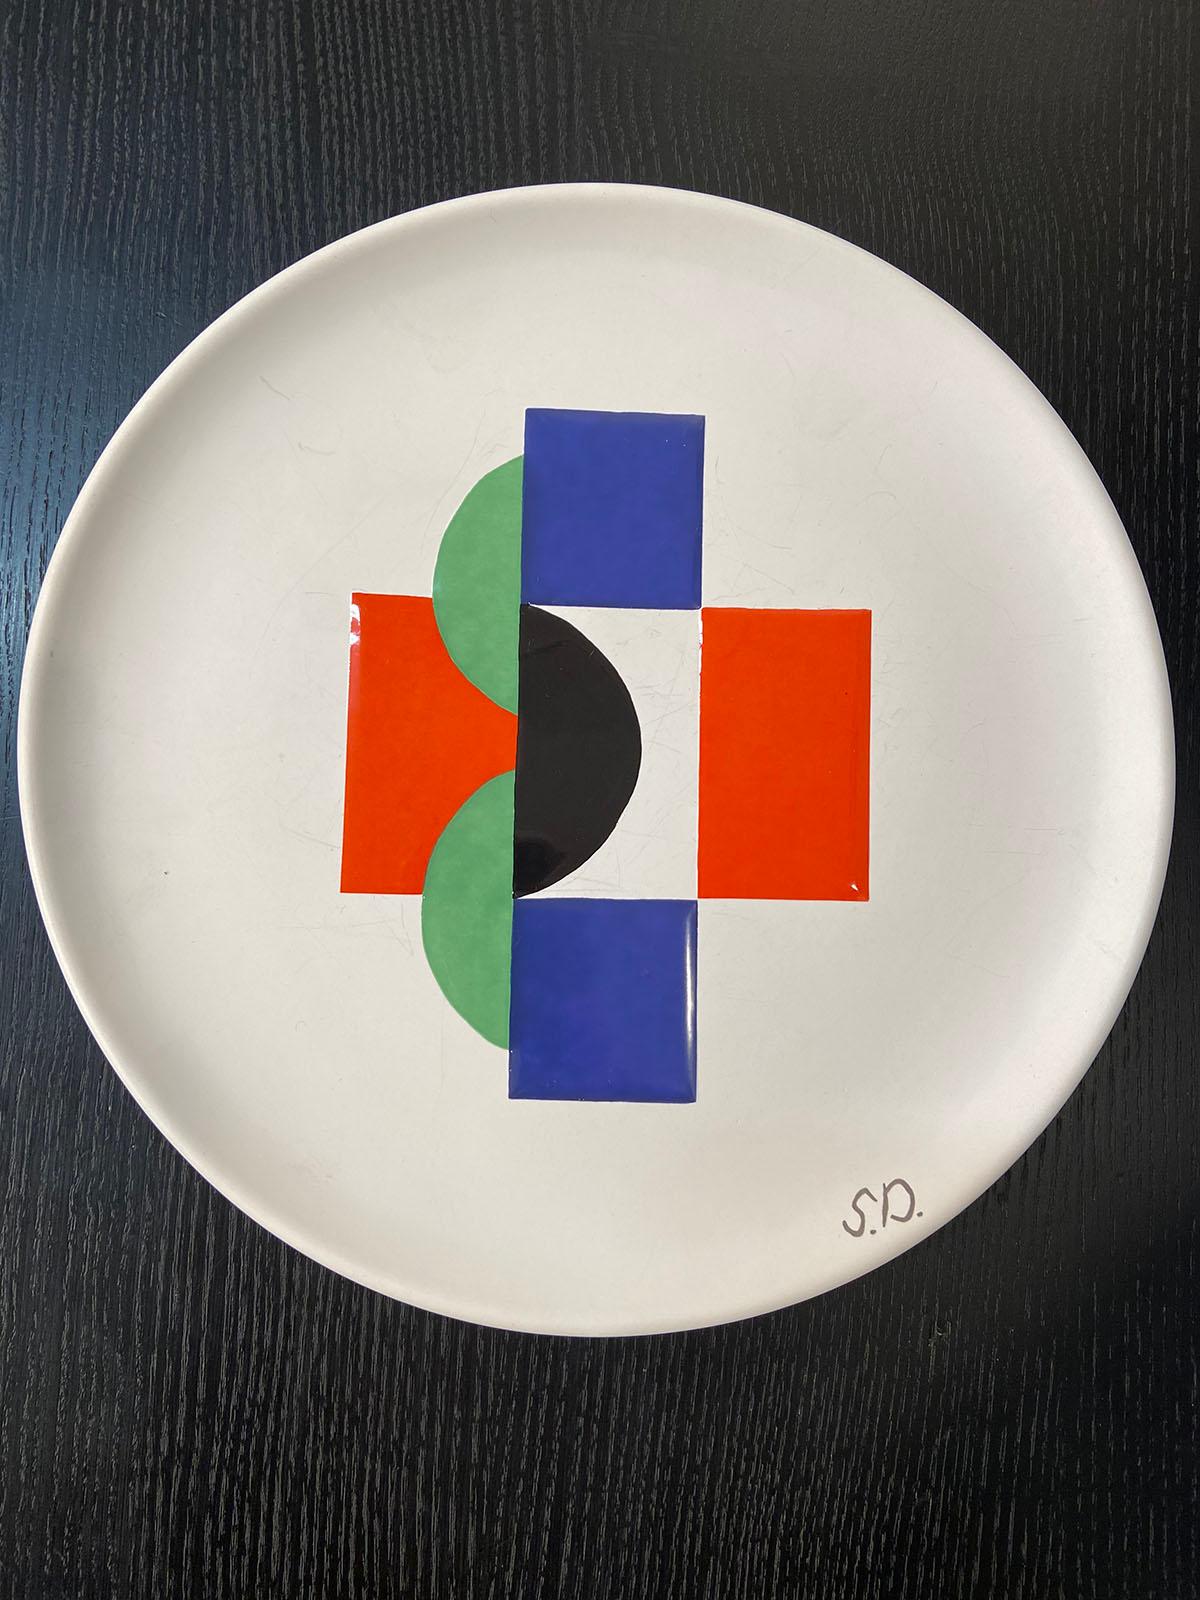 Sonia Delaunay, set of 6 plates and 1 large plate,
circa 1985
Edition Moustiers France & Artcurial, Paris
Signed with the initials S.D on the border of the plates
White ceramic with abstract central decoration enameled polychrome
Measures: